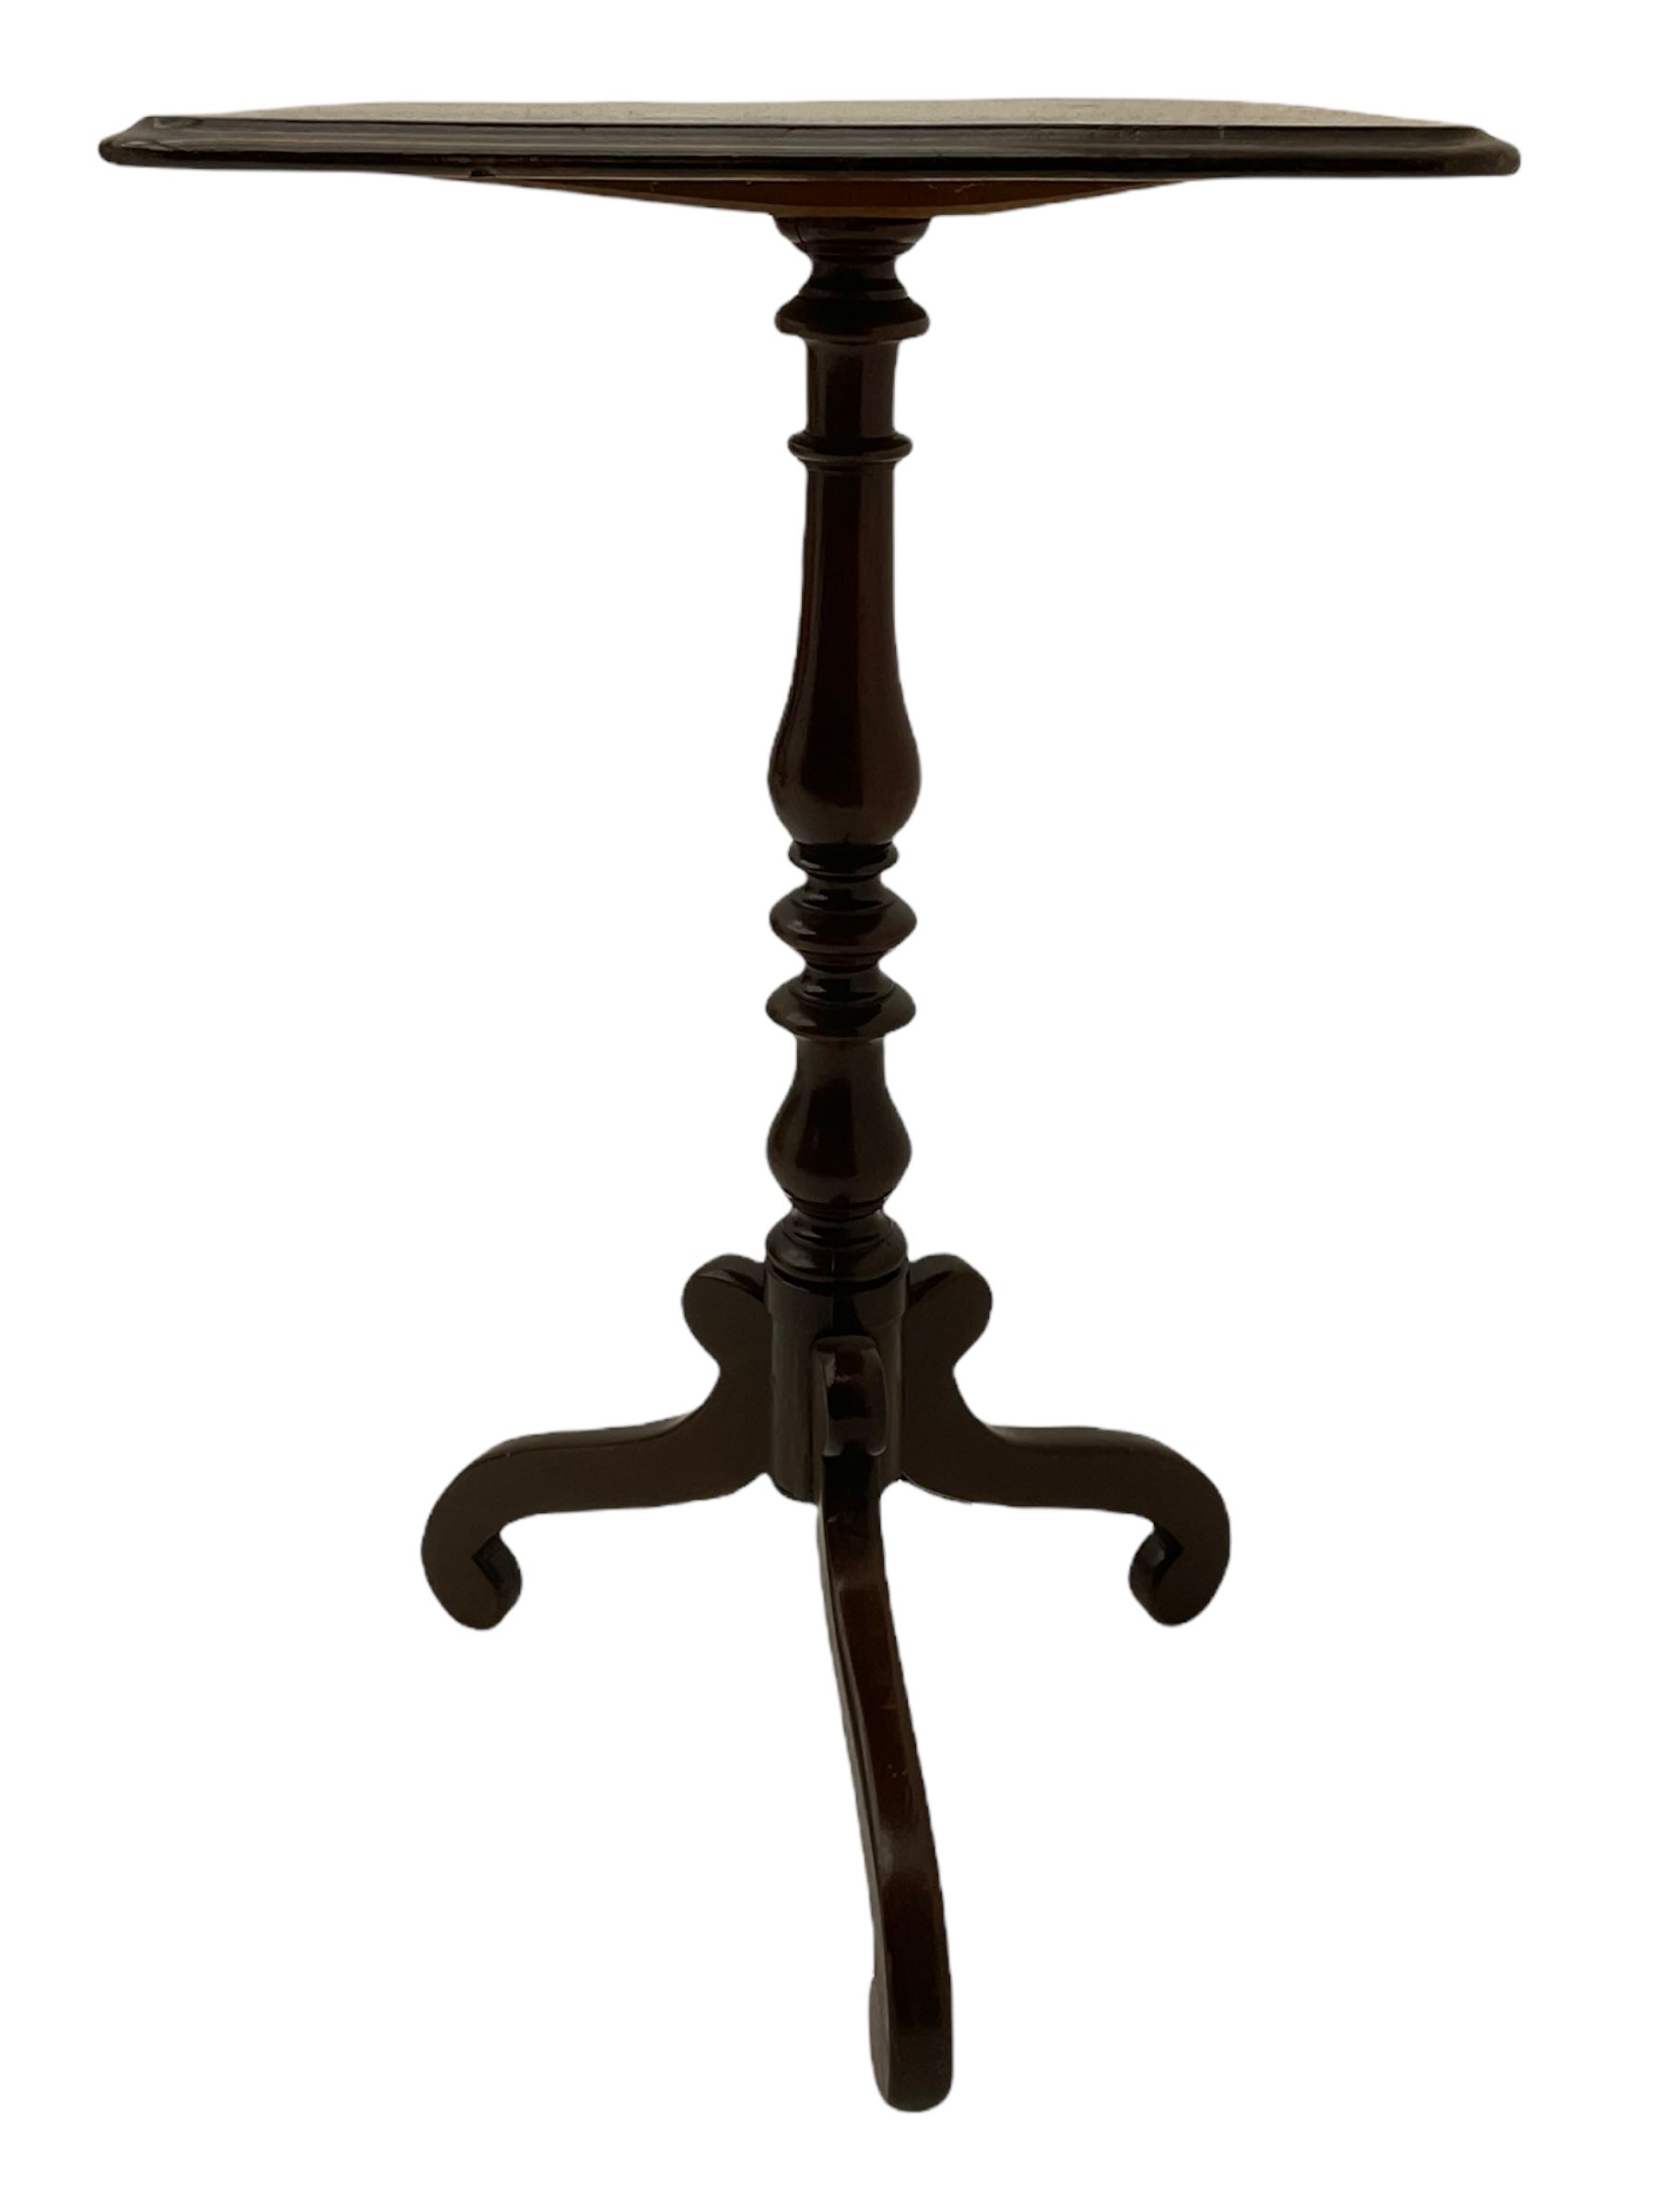 19th century tripod table - Image 3 of 5